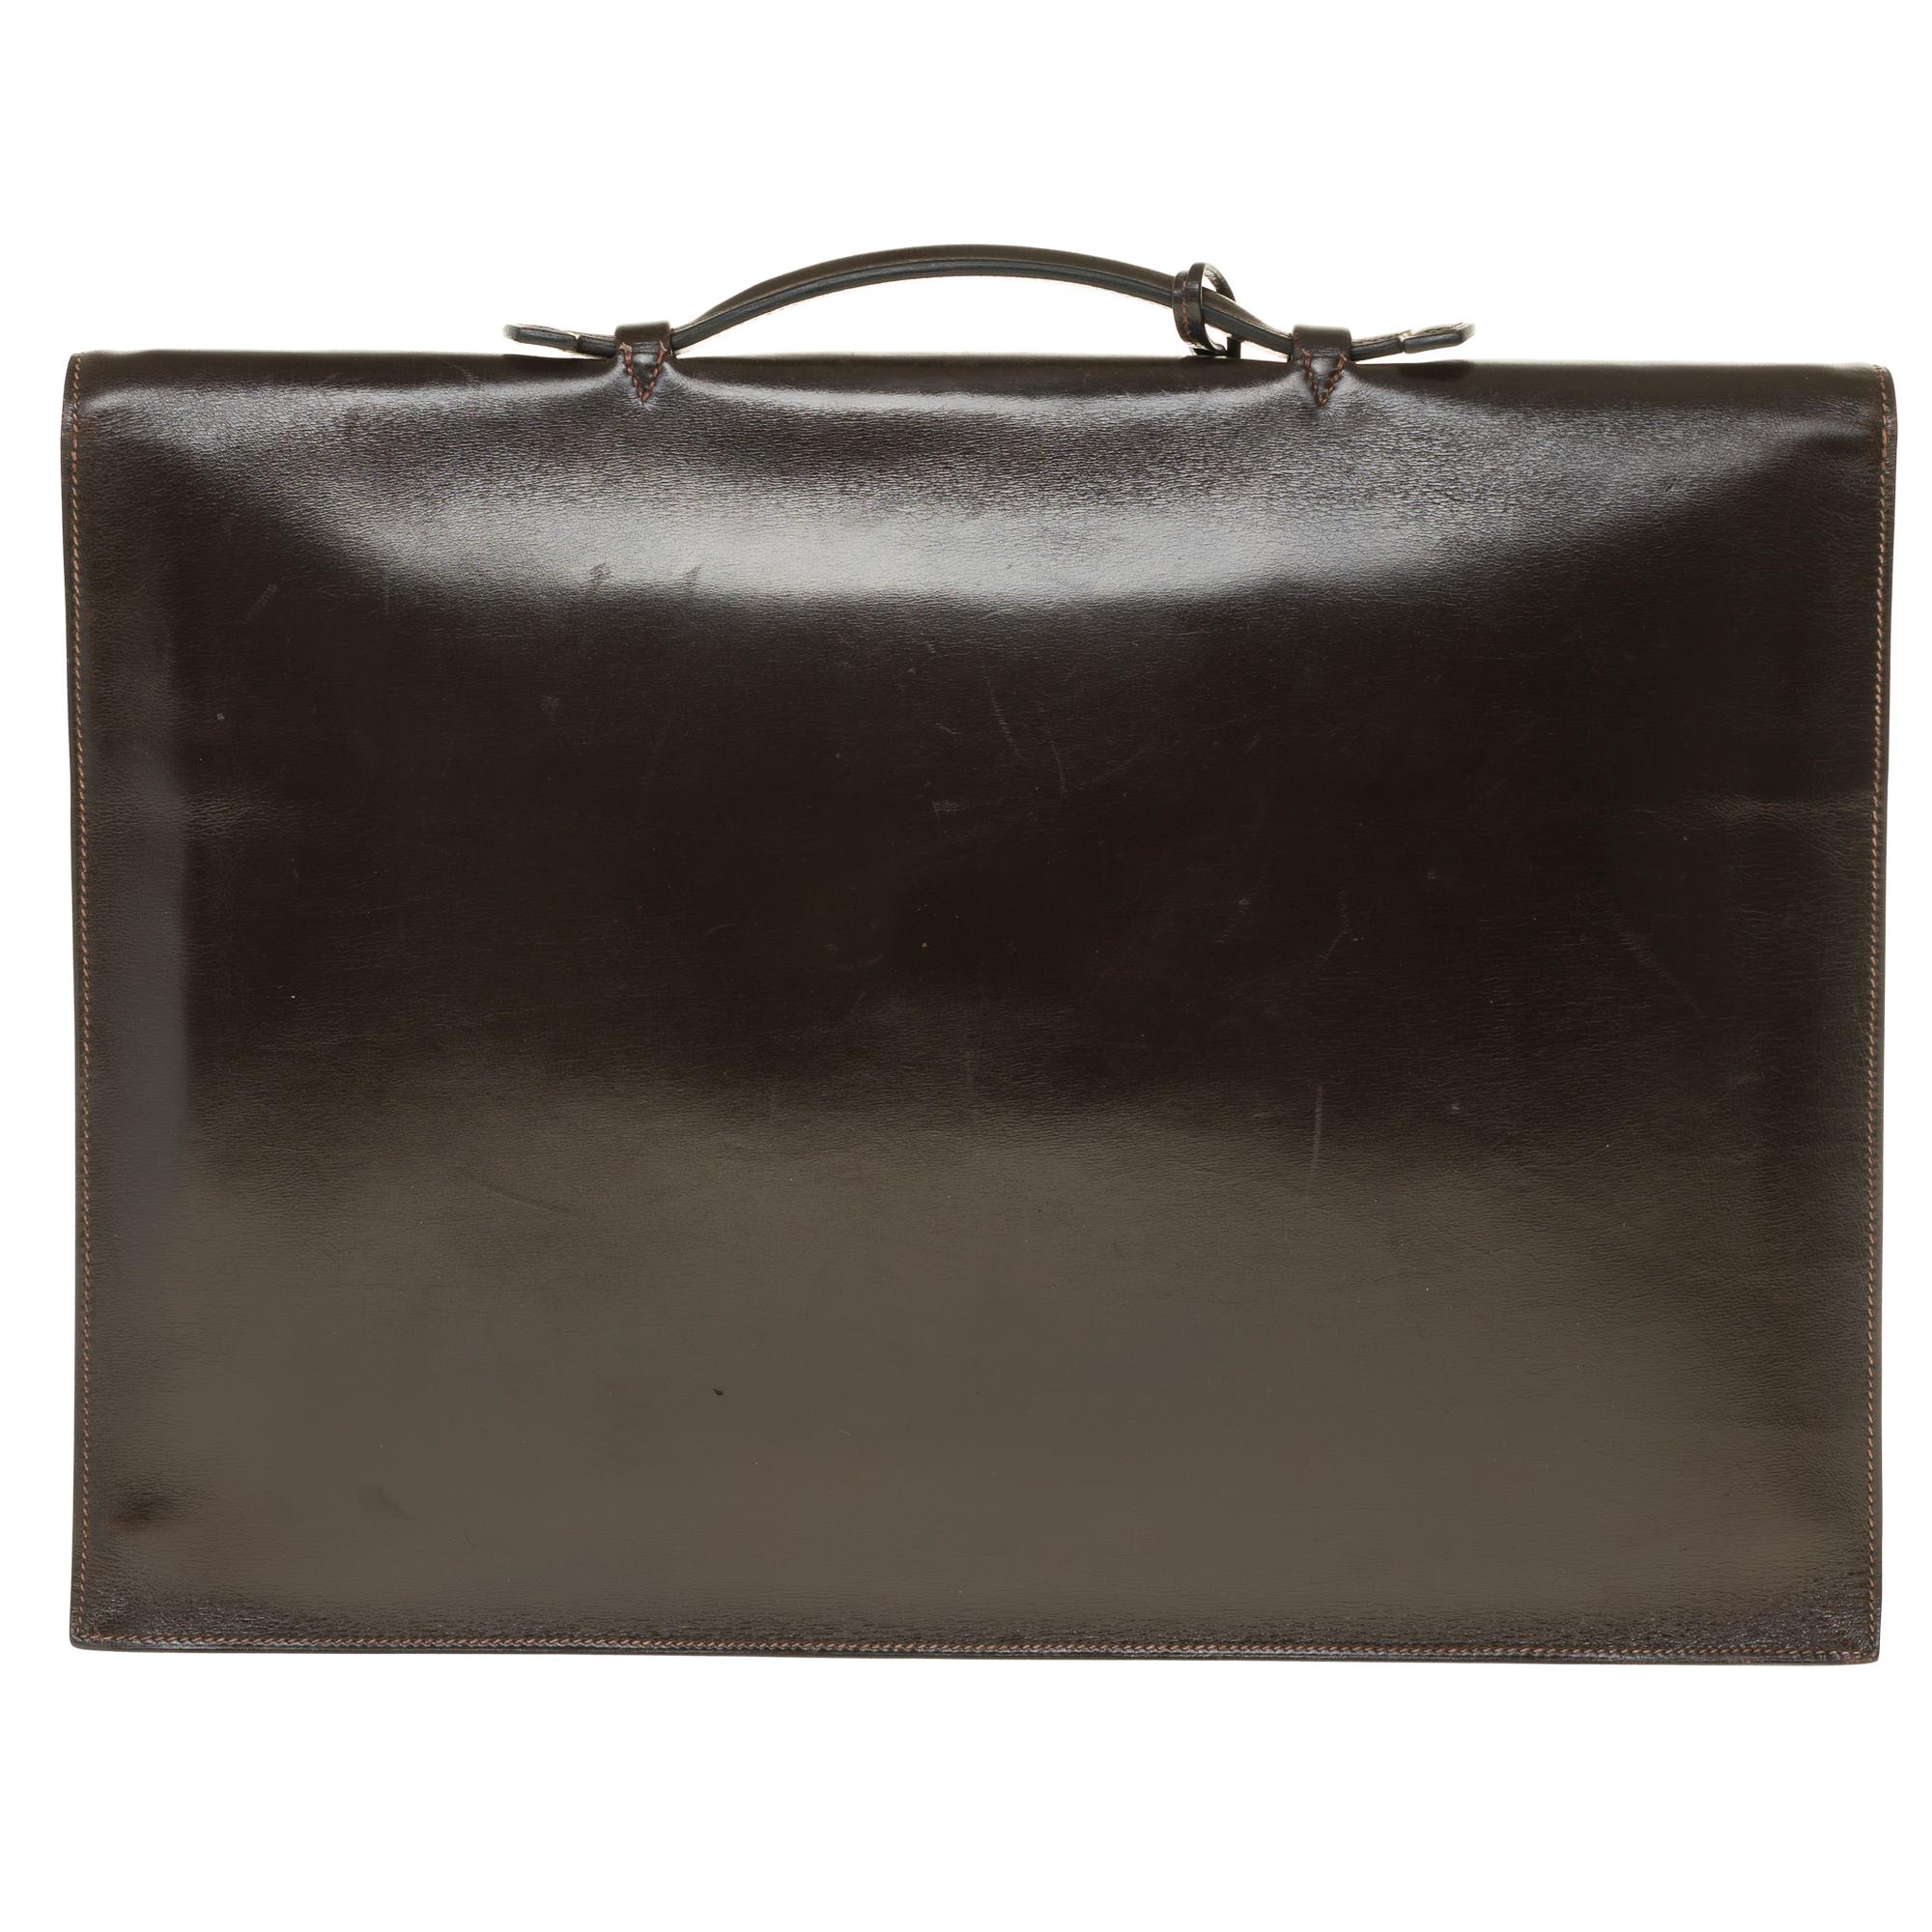 Elegant Hermès briefcase Brown leather news bag, gold-tone metal hardware, simple brown leather handle for a handheld.

Fastening by flip latch on flap.
Lining in brown leather.
Signature: 